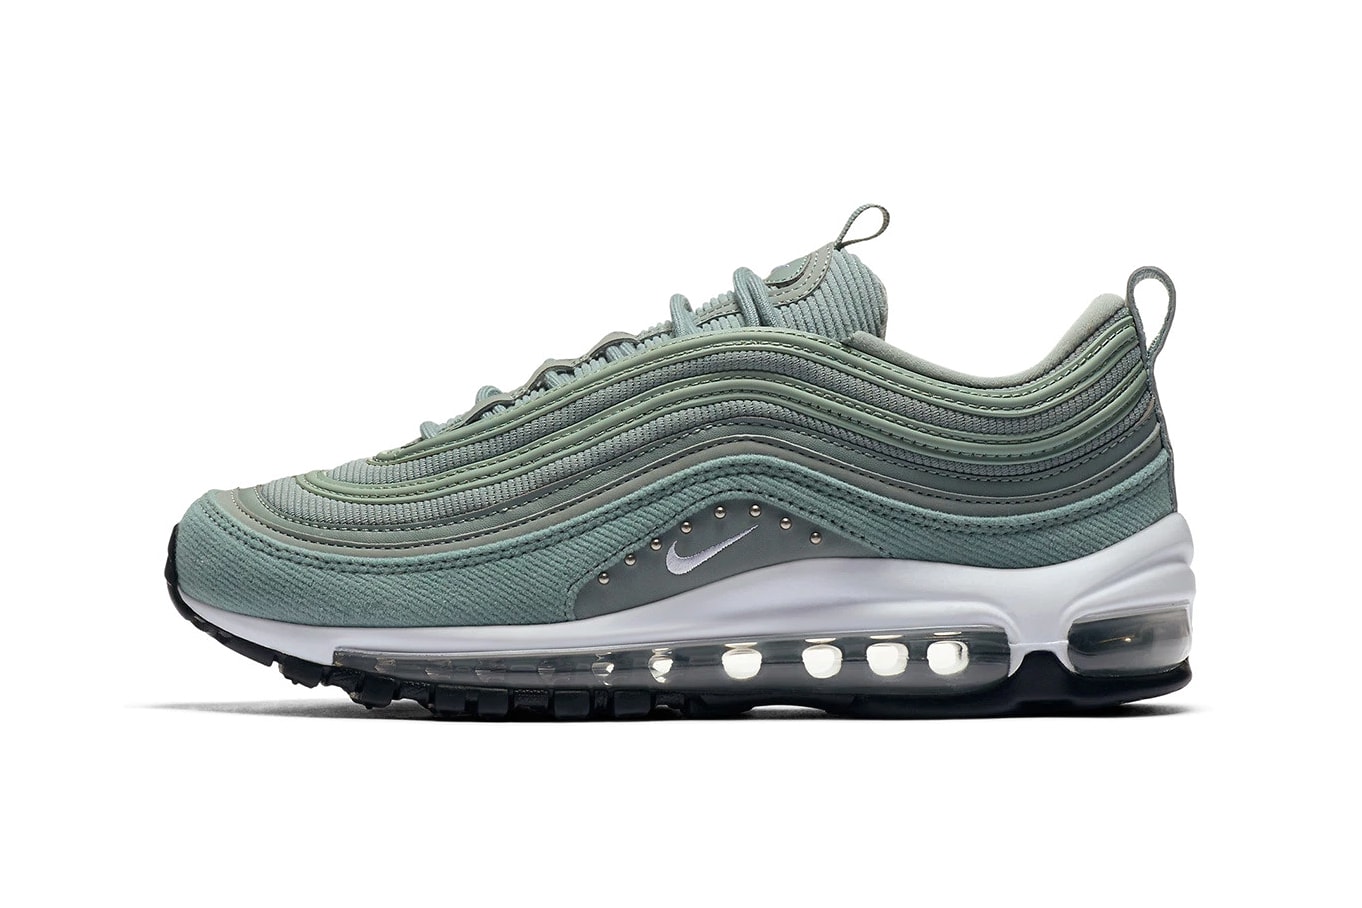 Nike Air Max 97 Mica Green Corduroy Studs Release Details Footwear Shoes Trainers Sneakers Kicks Date Coming Soon Purchase Cop Buy